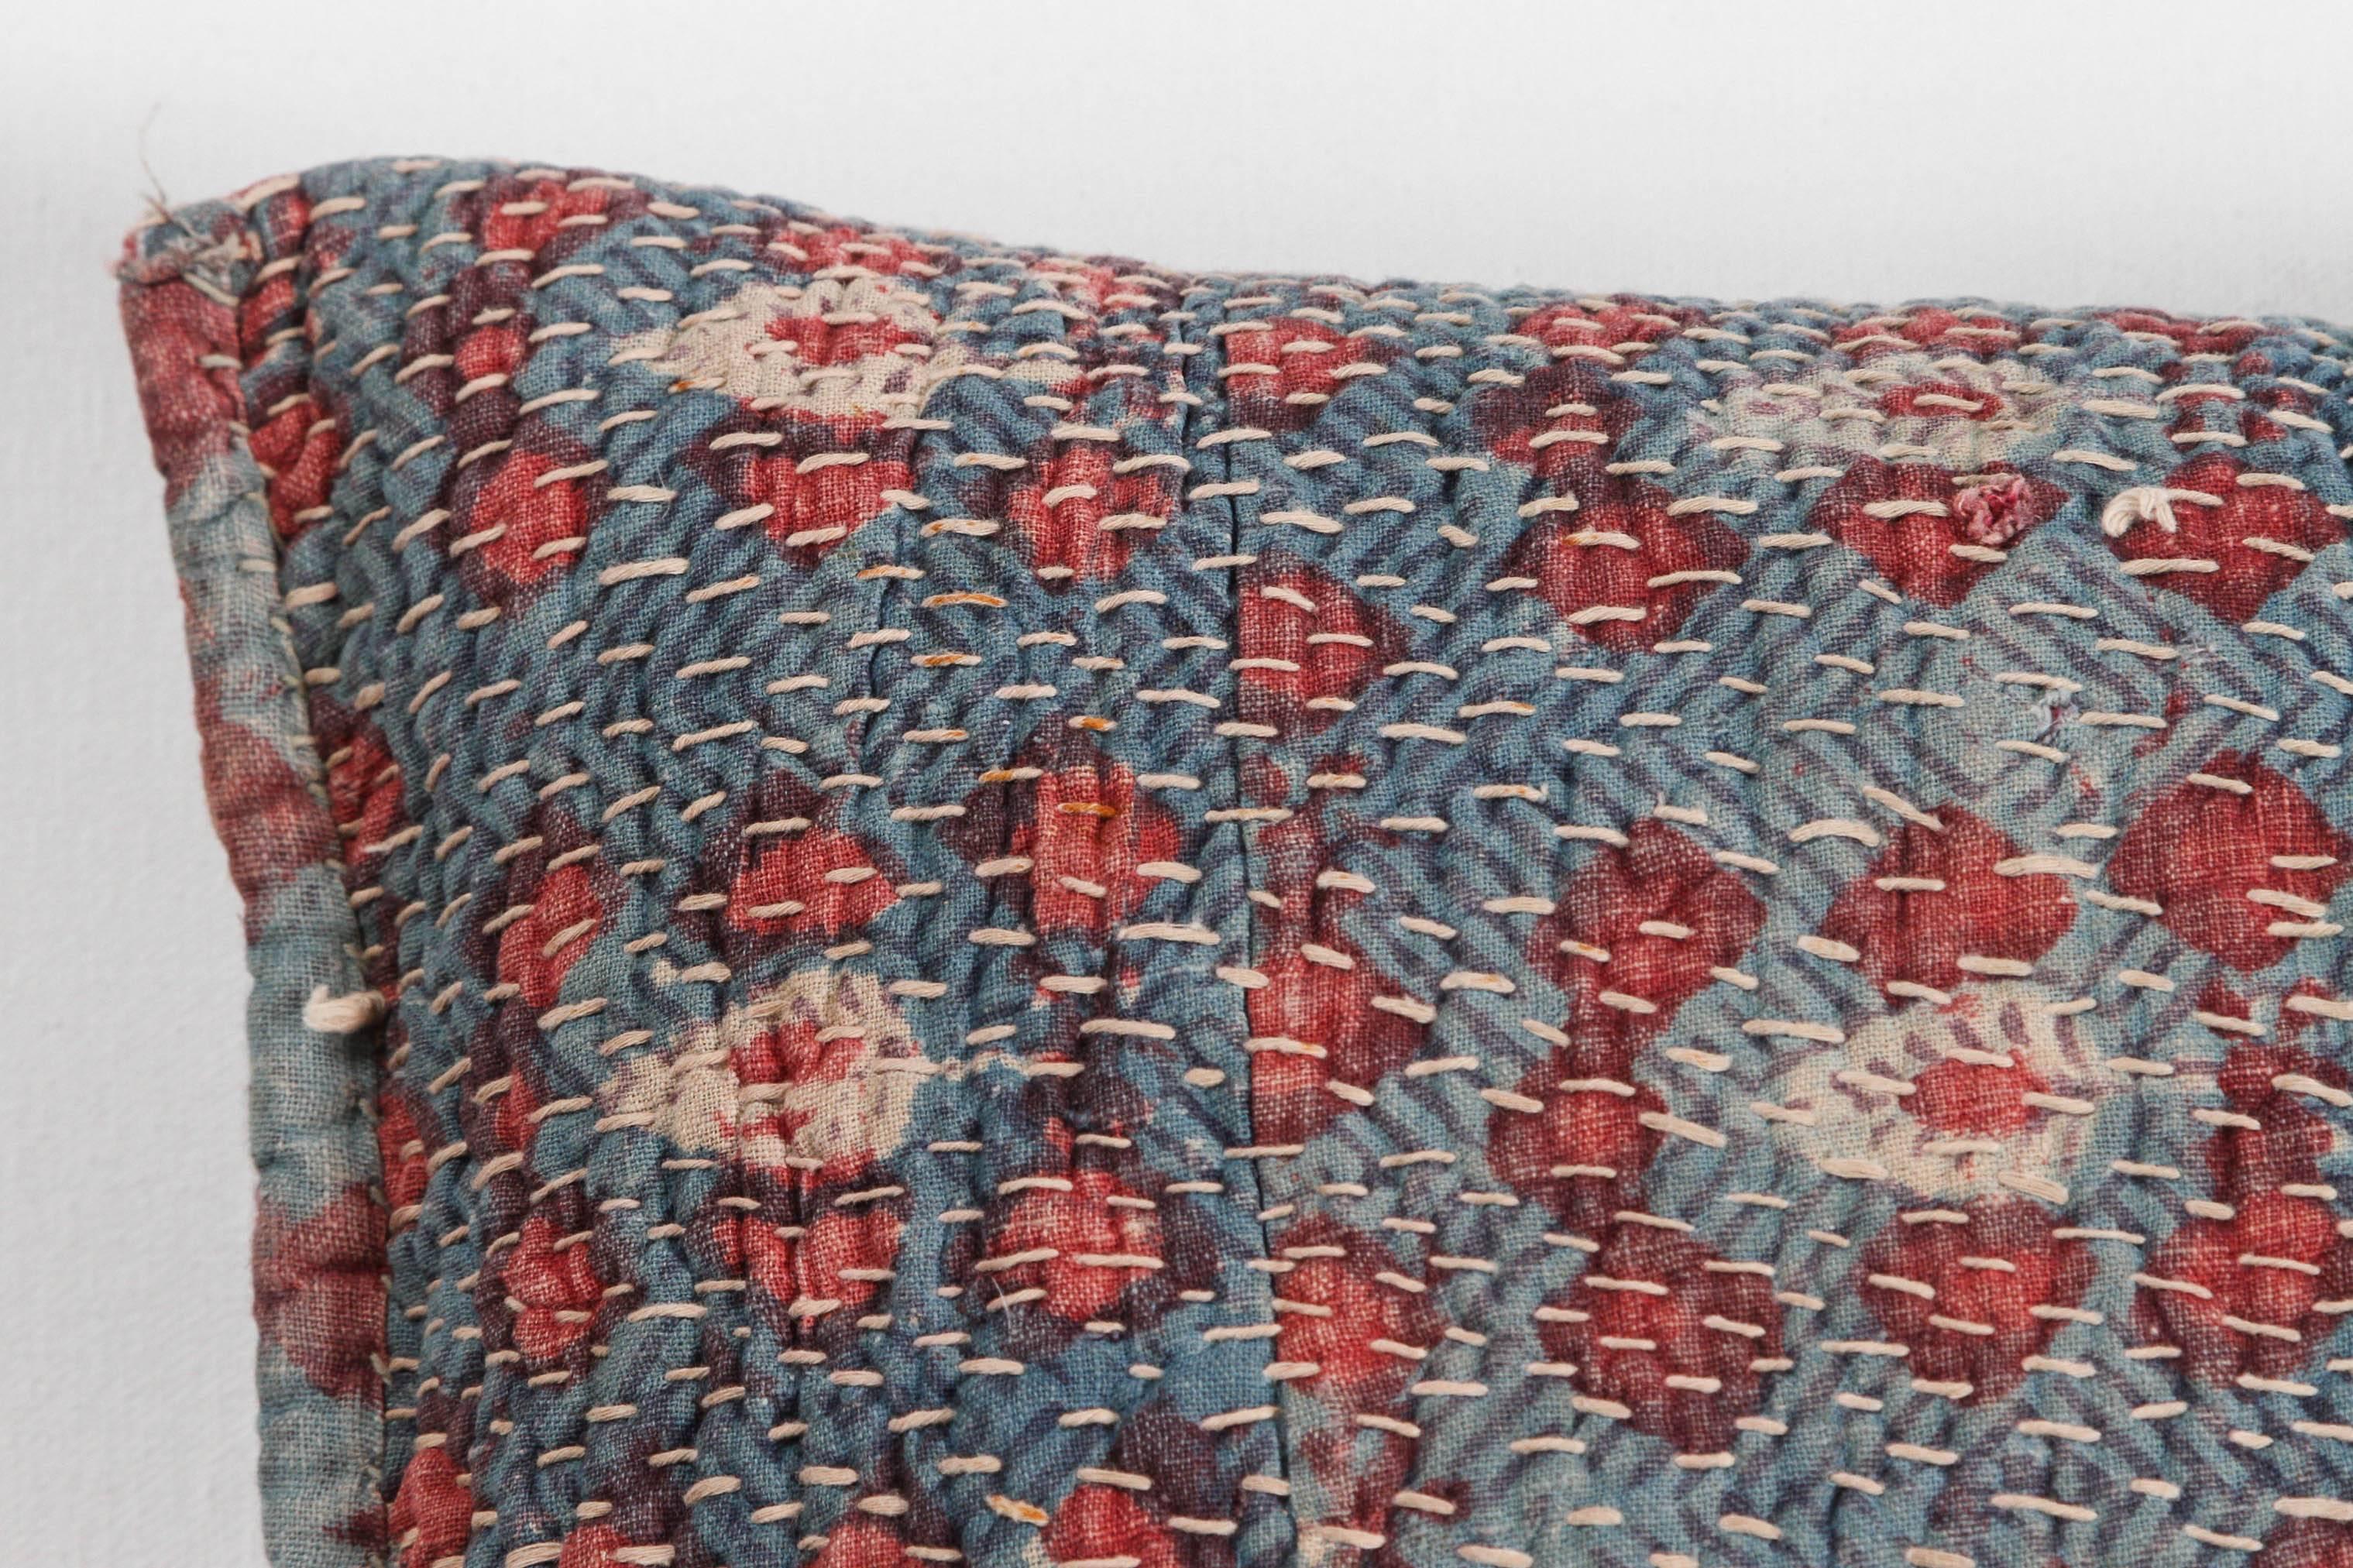 North Indian quilted storage bag made into a two-sided pillow or cushion. Vintage floral cotton block printed textile with hand quilting stitches. Blue, red, ivory. Zipper added. Feather and down fill.